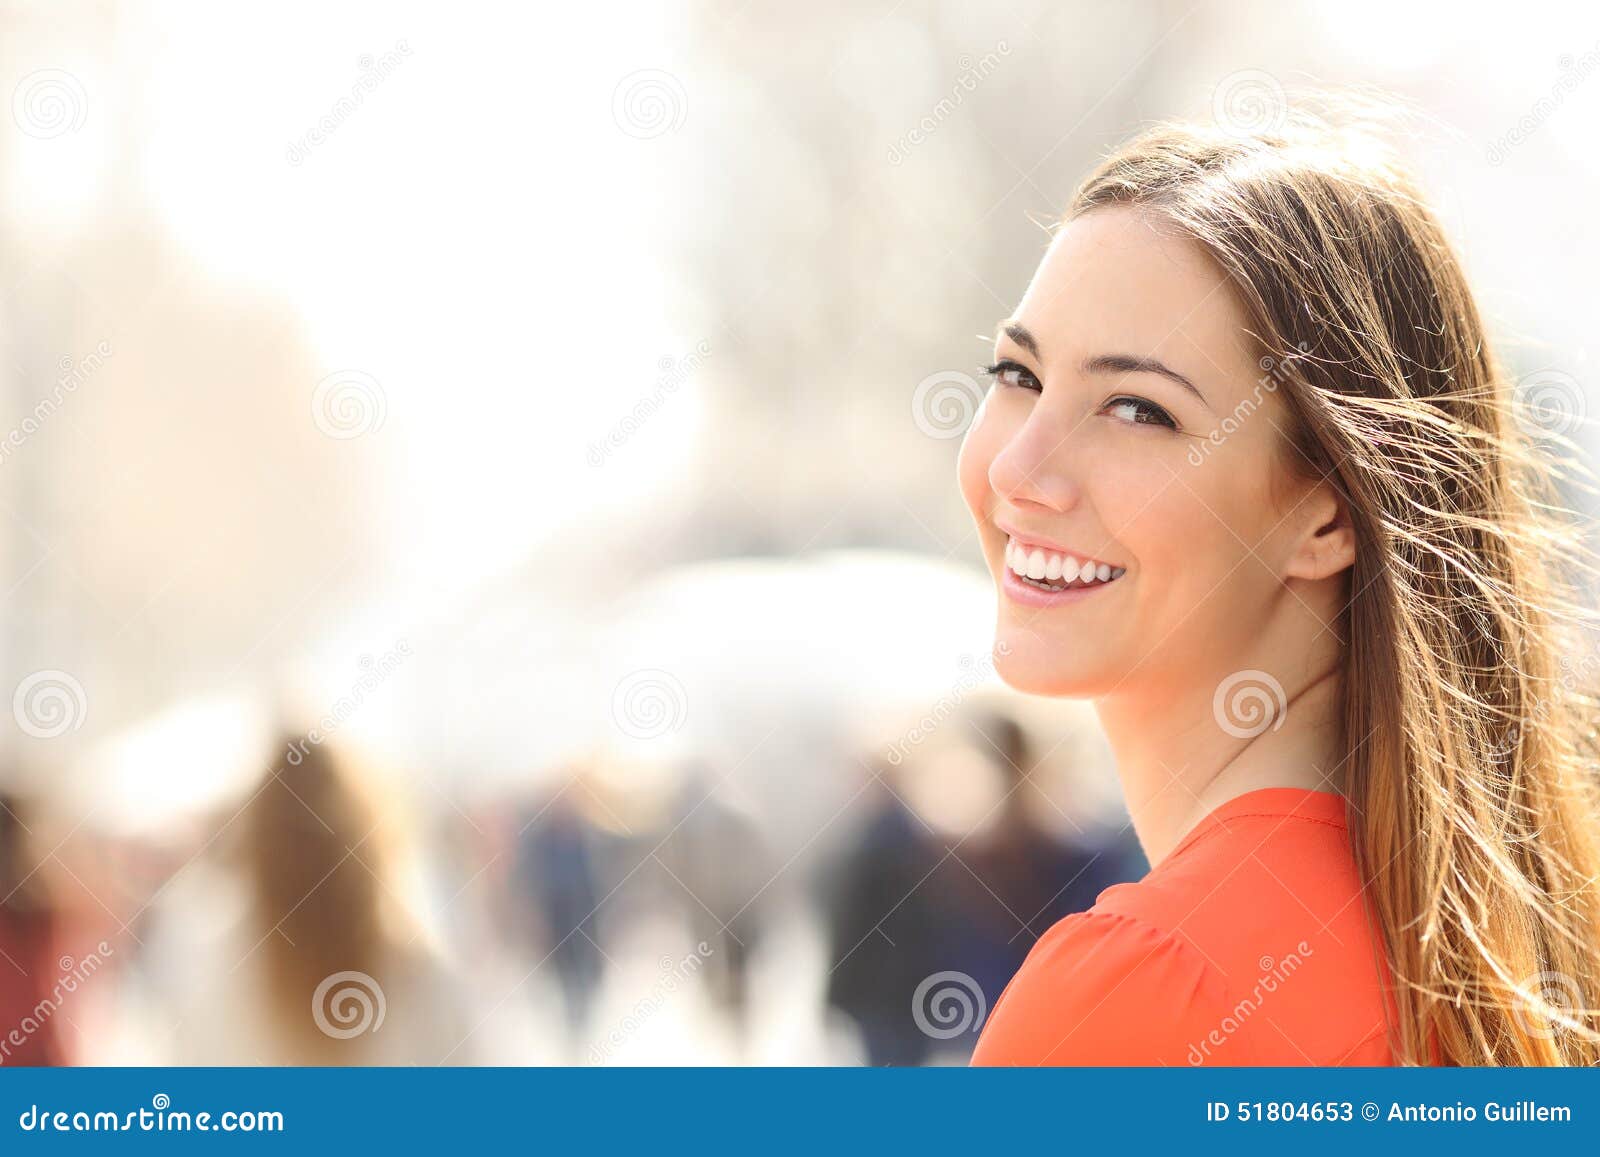 beauty woman with perfect smile and white teeth on the street